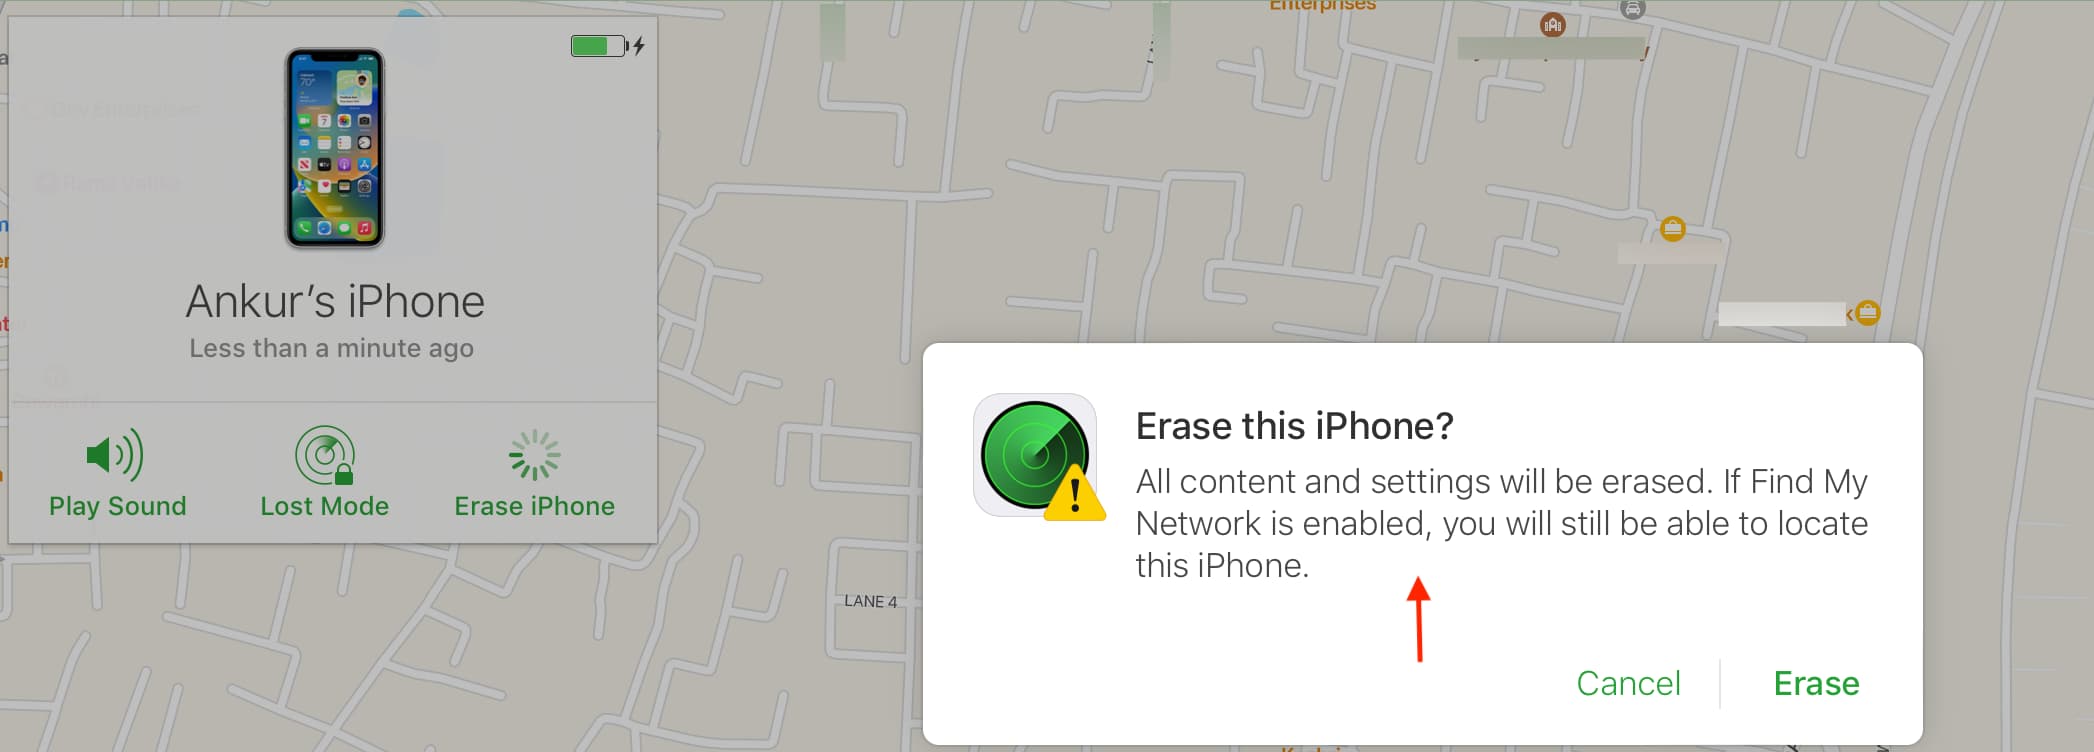 iPhone remains findable even after erasing it remotely